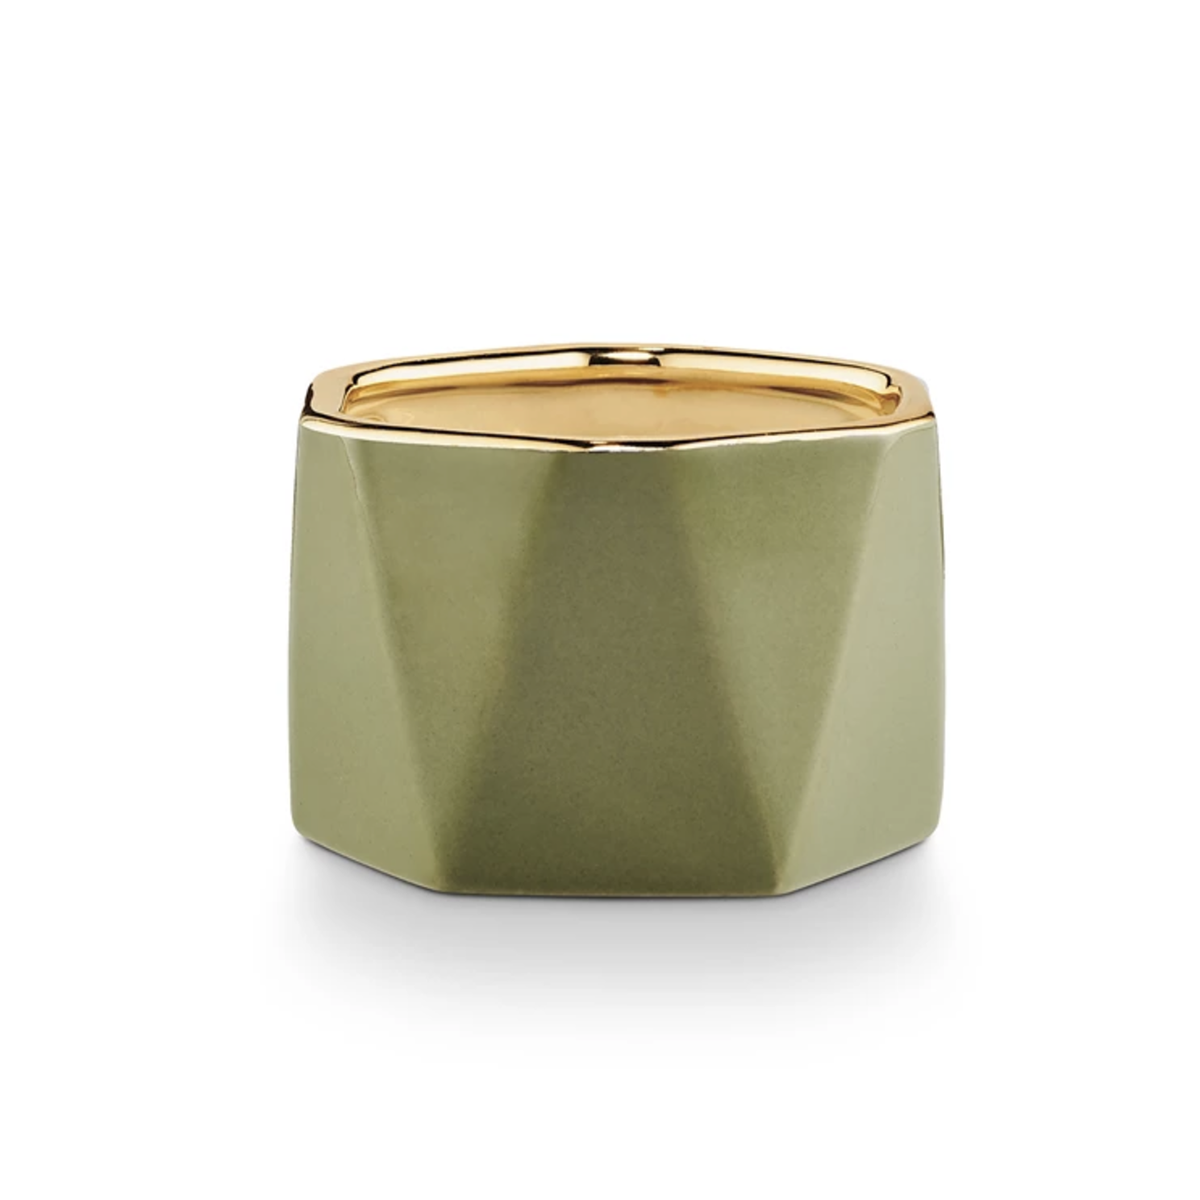 illume - ILL Balsam and Cedar Dylan Ceramic Candle